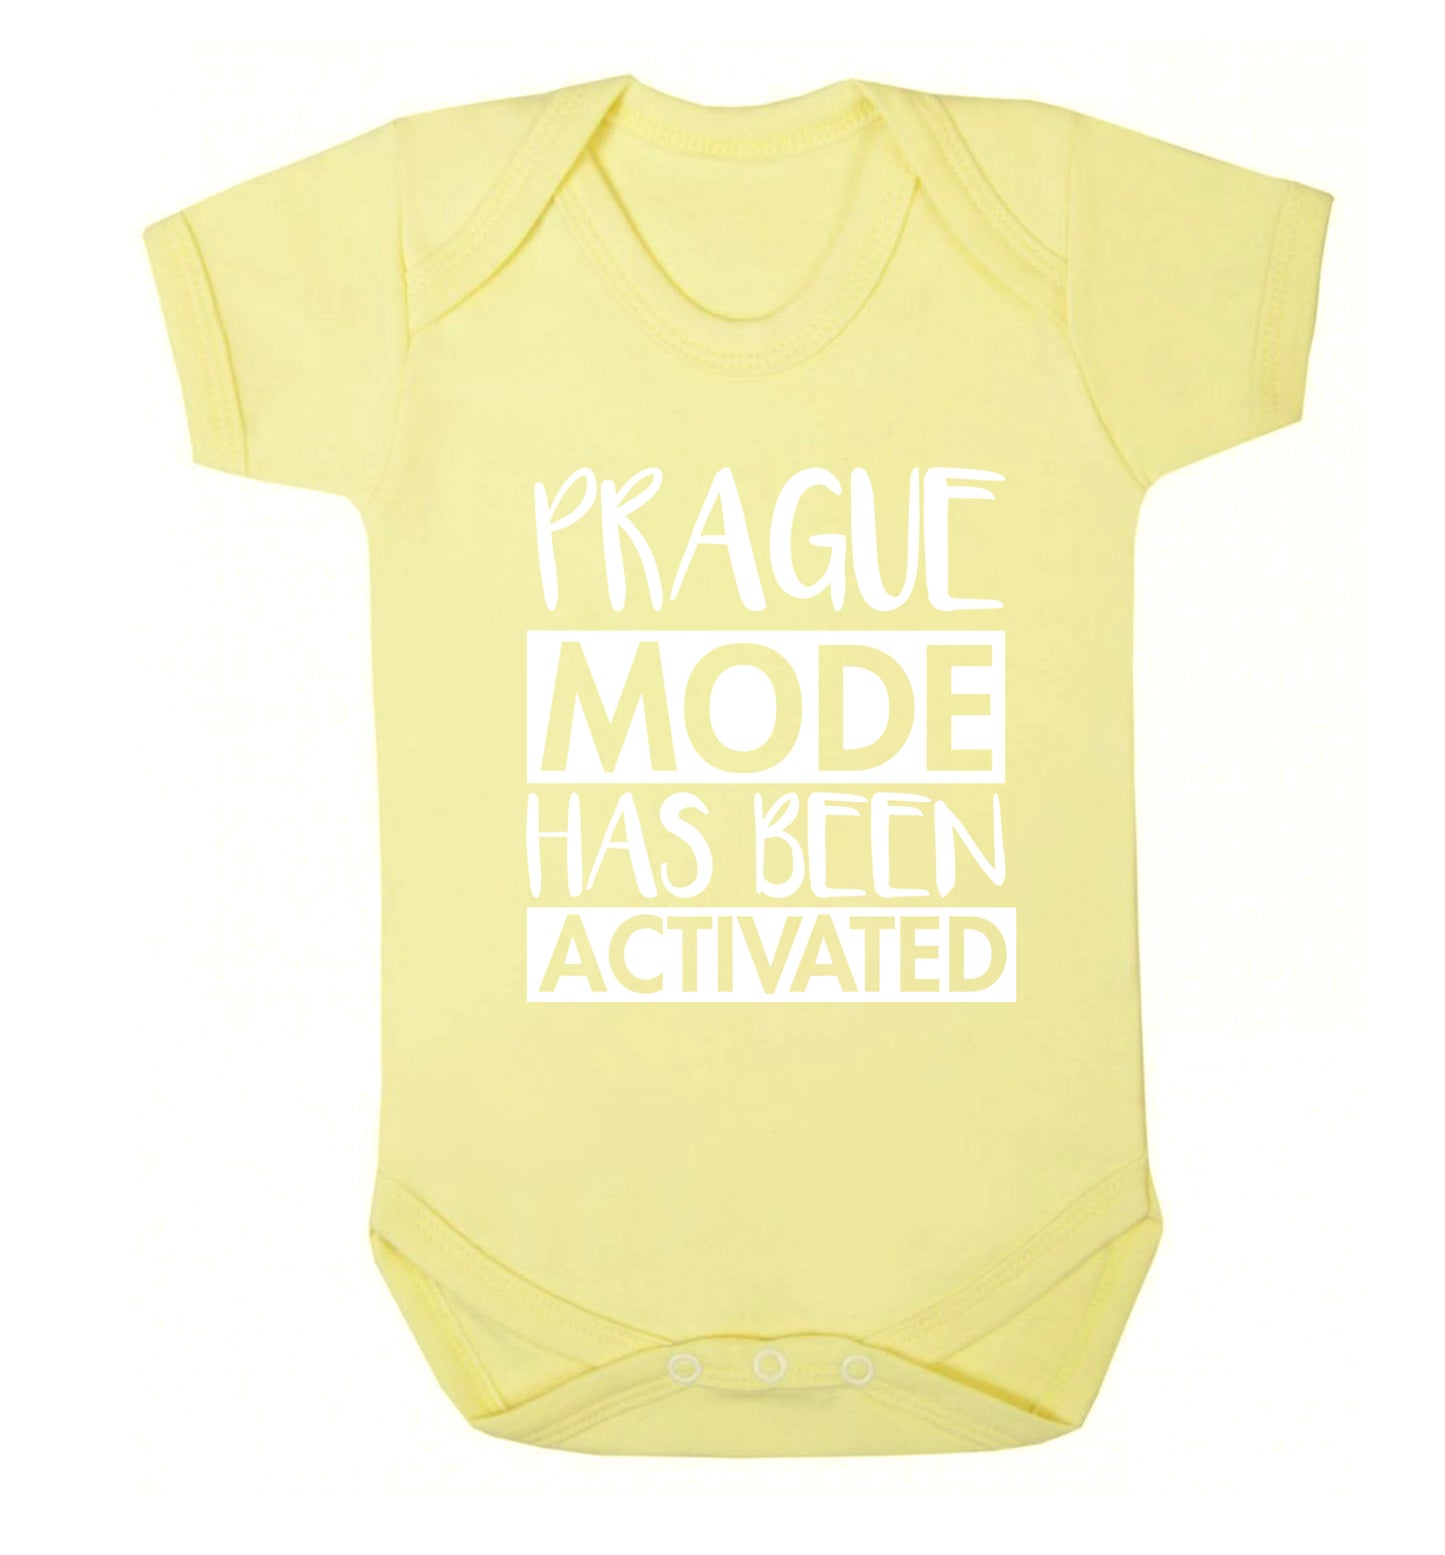 Prague mode has been activated Baby Vest pale yellow 18-24 months